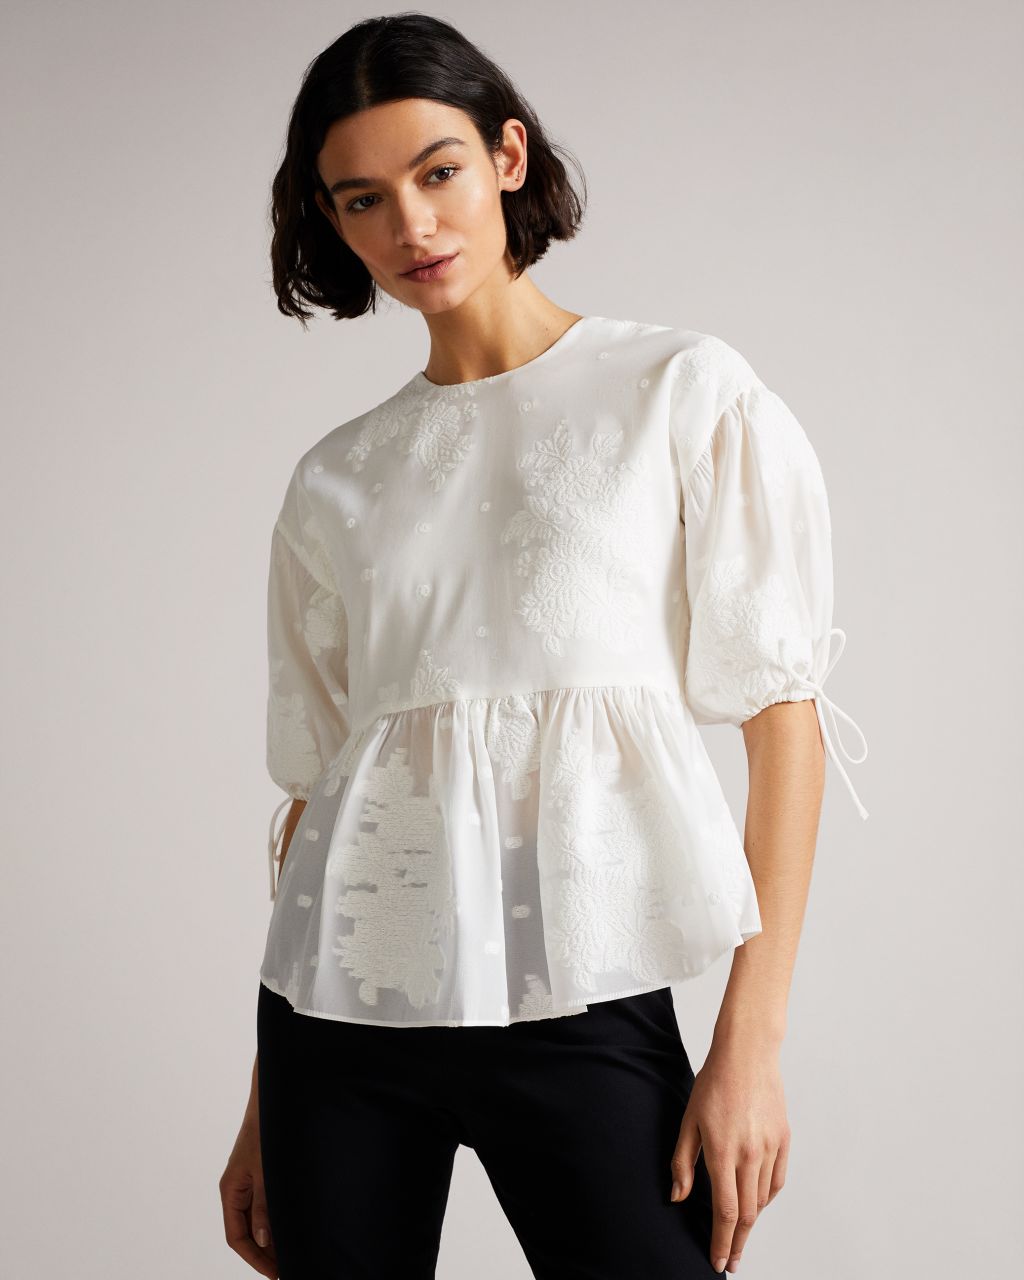 Ted Baker Women's Exaggerated Puff Sleeve Top in White, Karni, Cotton